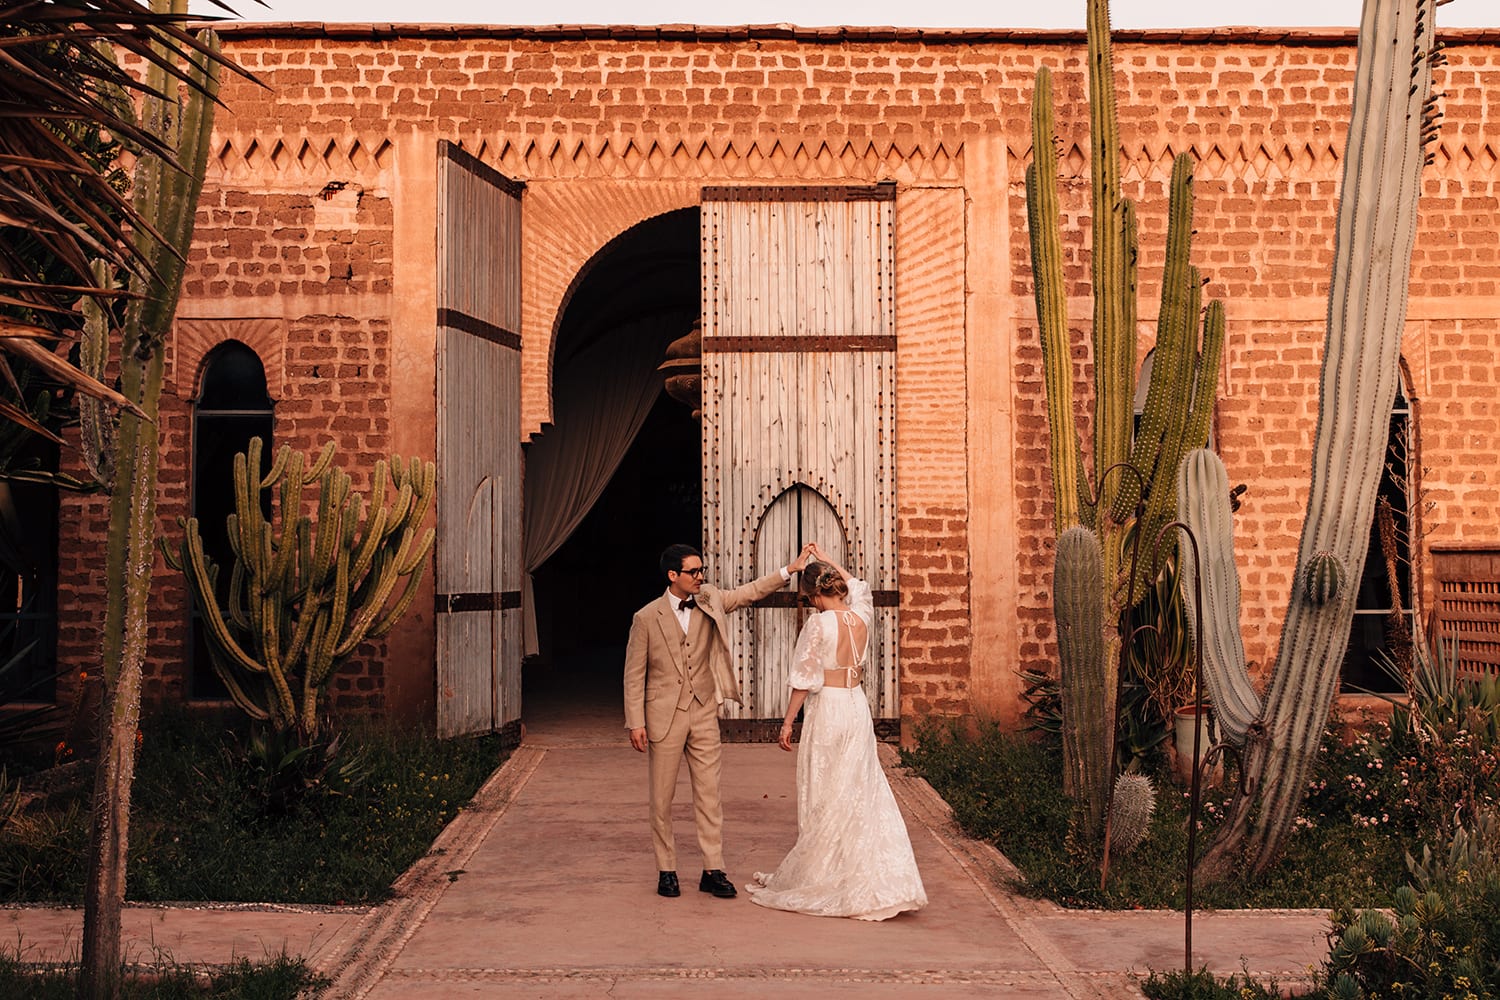 Bride and Groom dncing under a giant cactus in Marrakesh